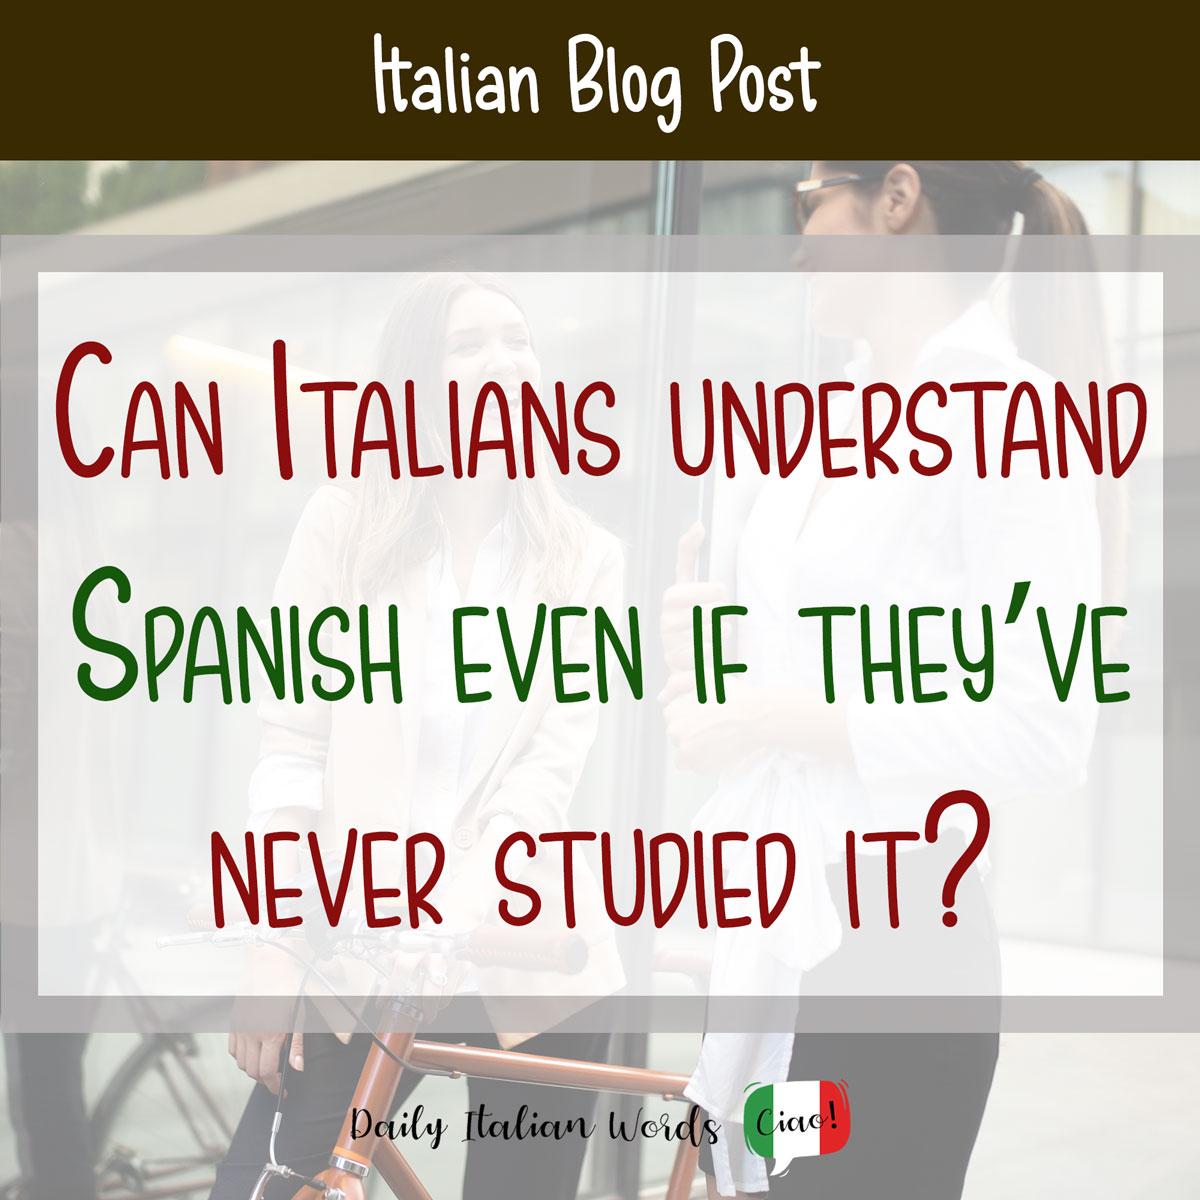 Can Italians understand Spanish even if they have never learned Spanish?